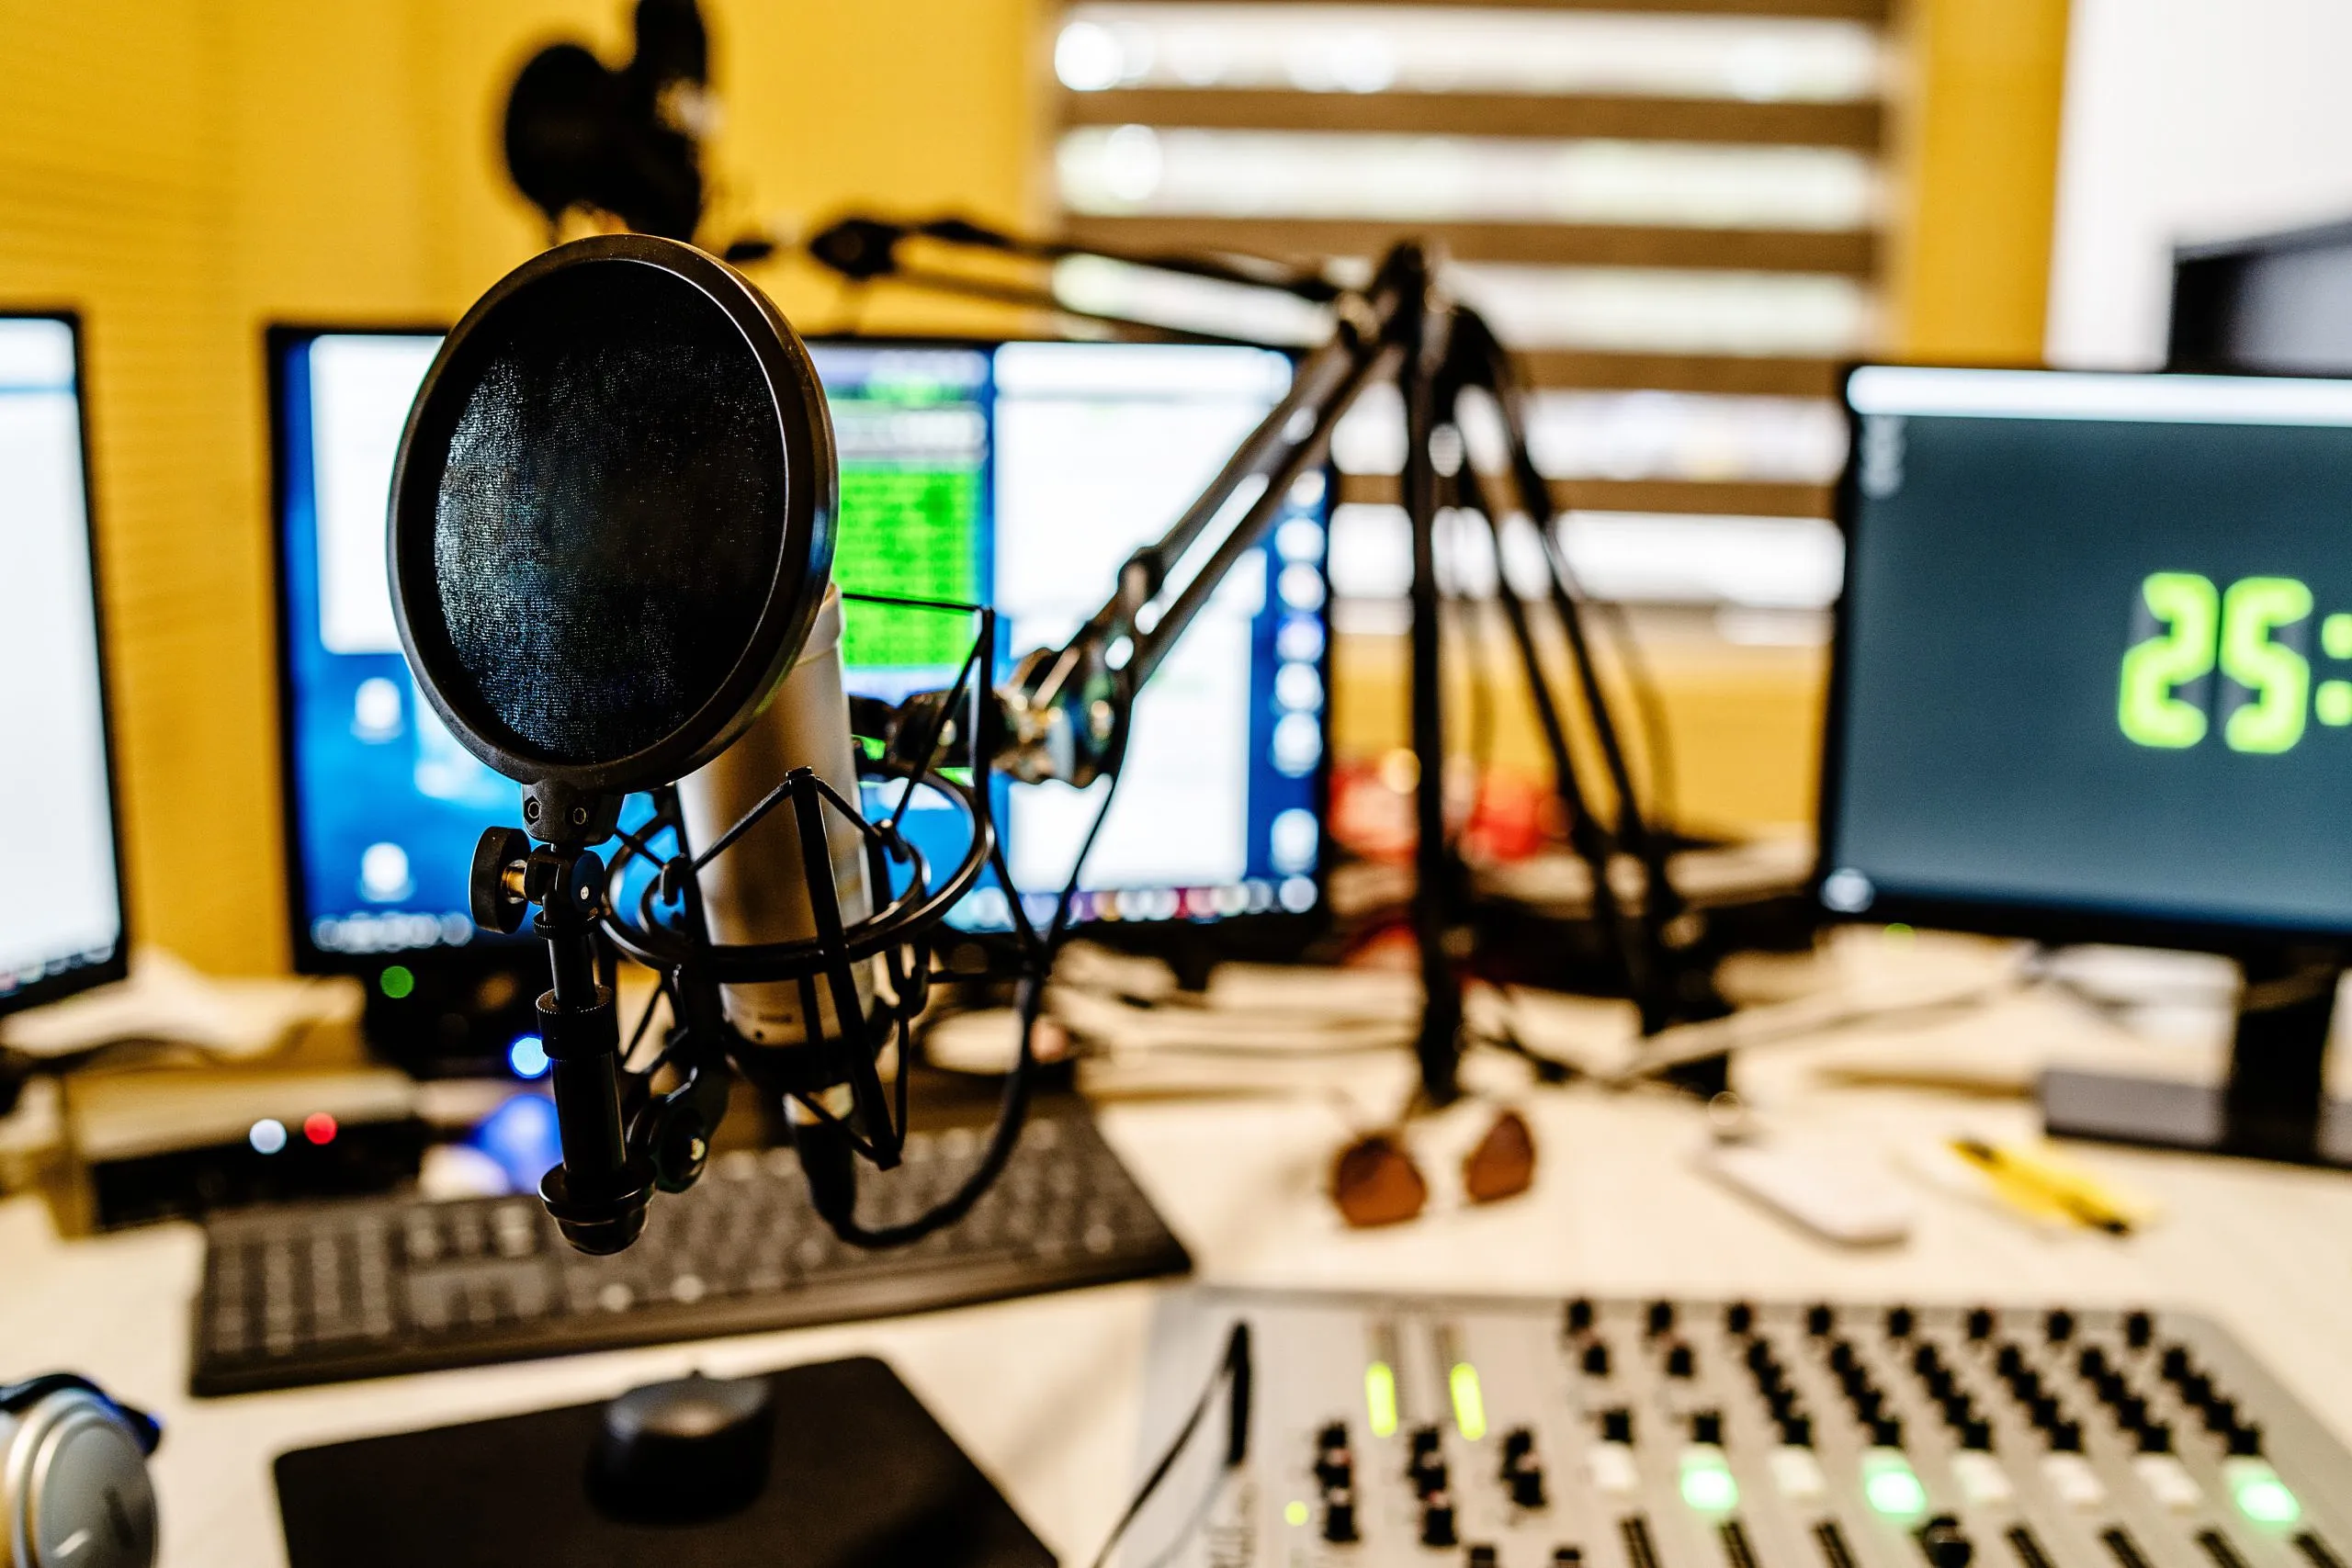 Radio Advertising: Advantages and Disadvantages